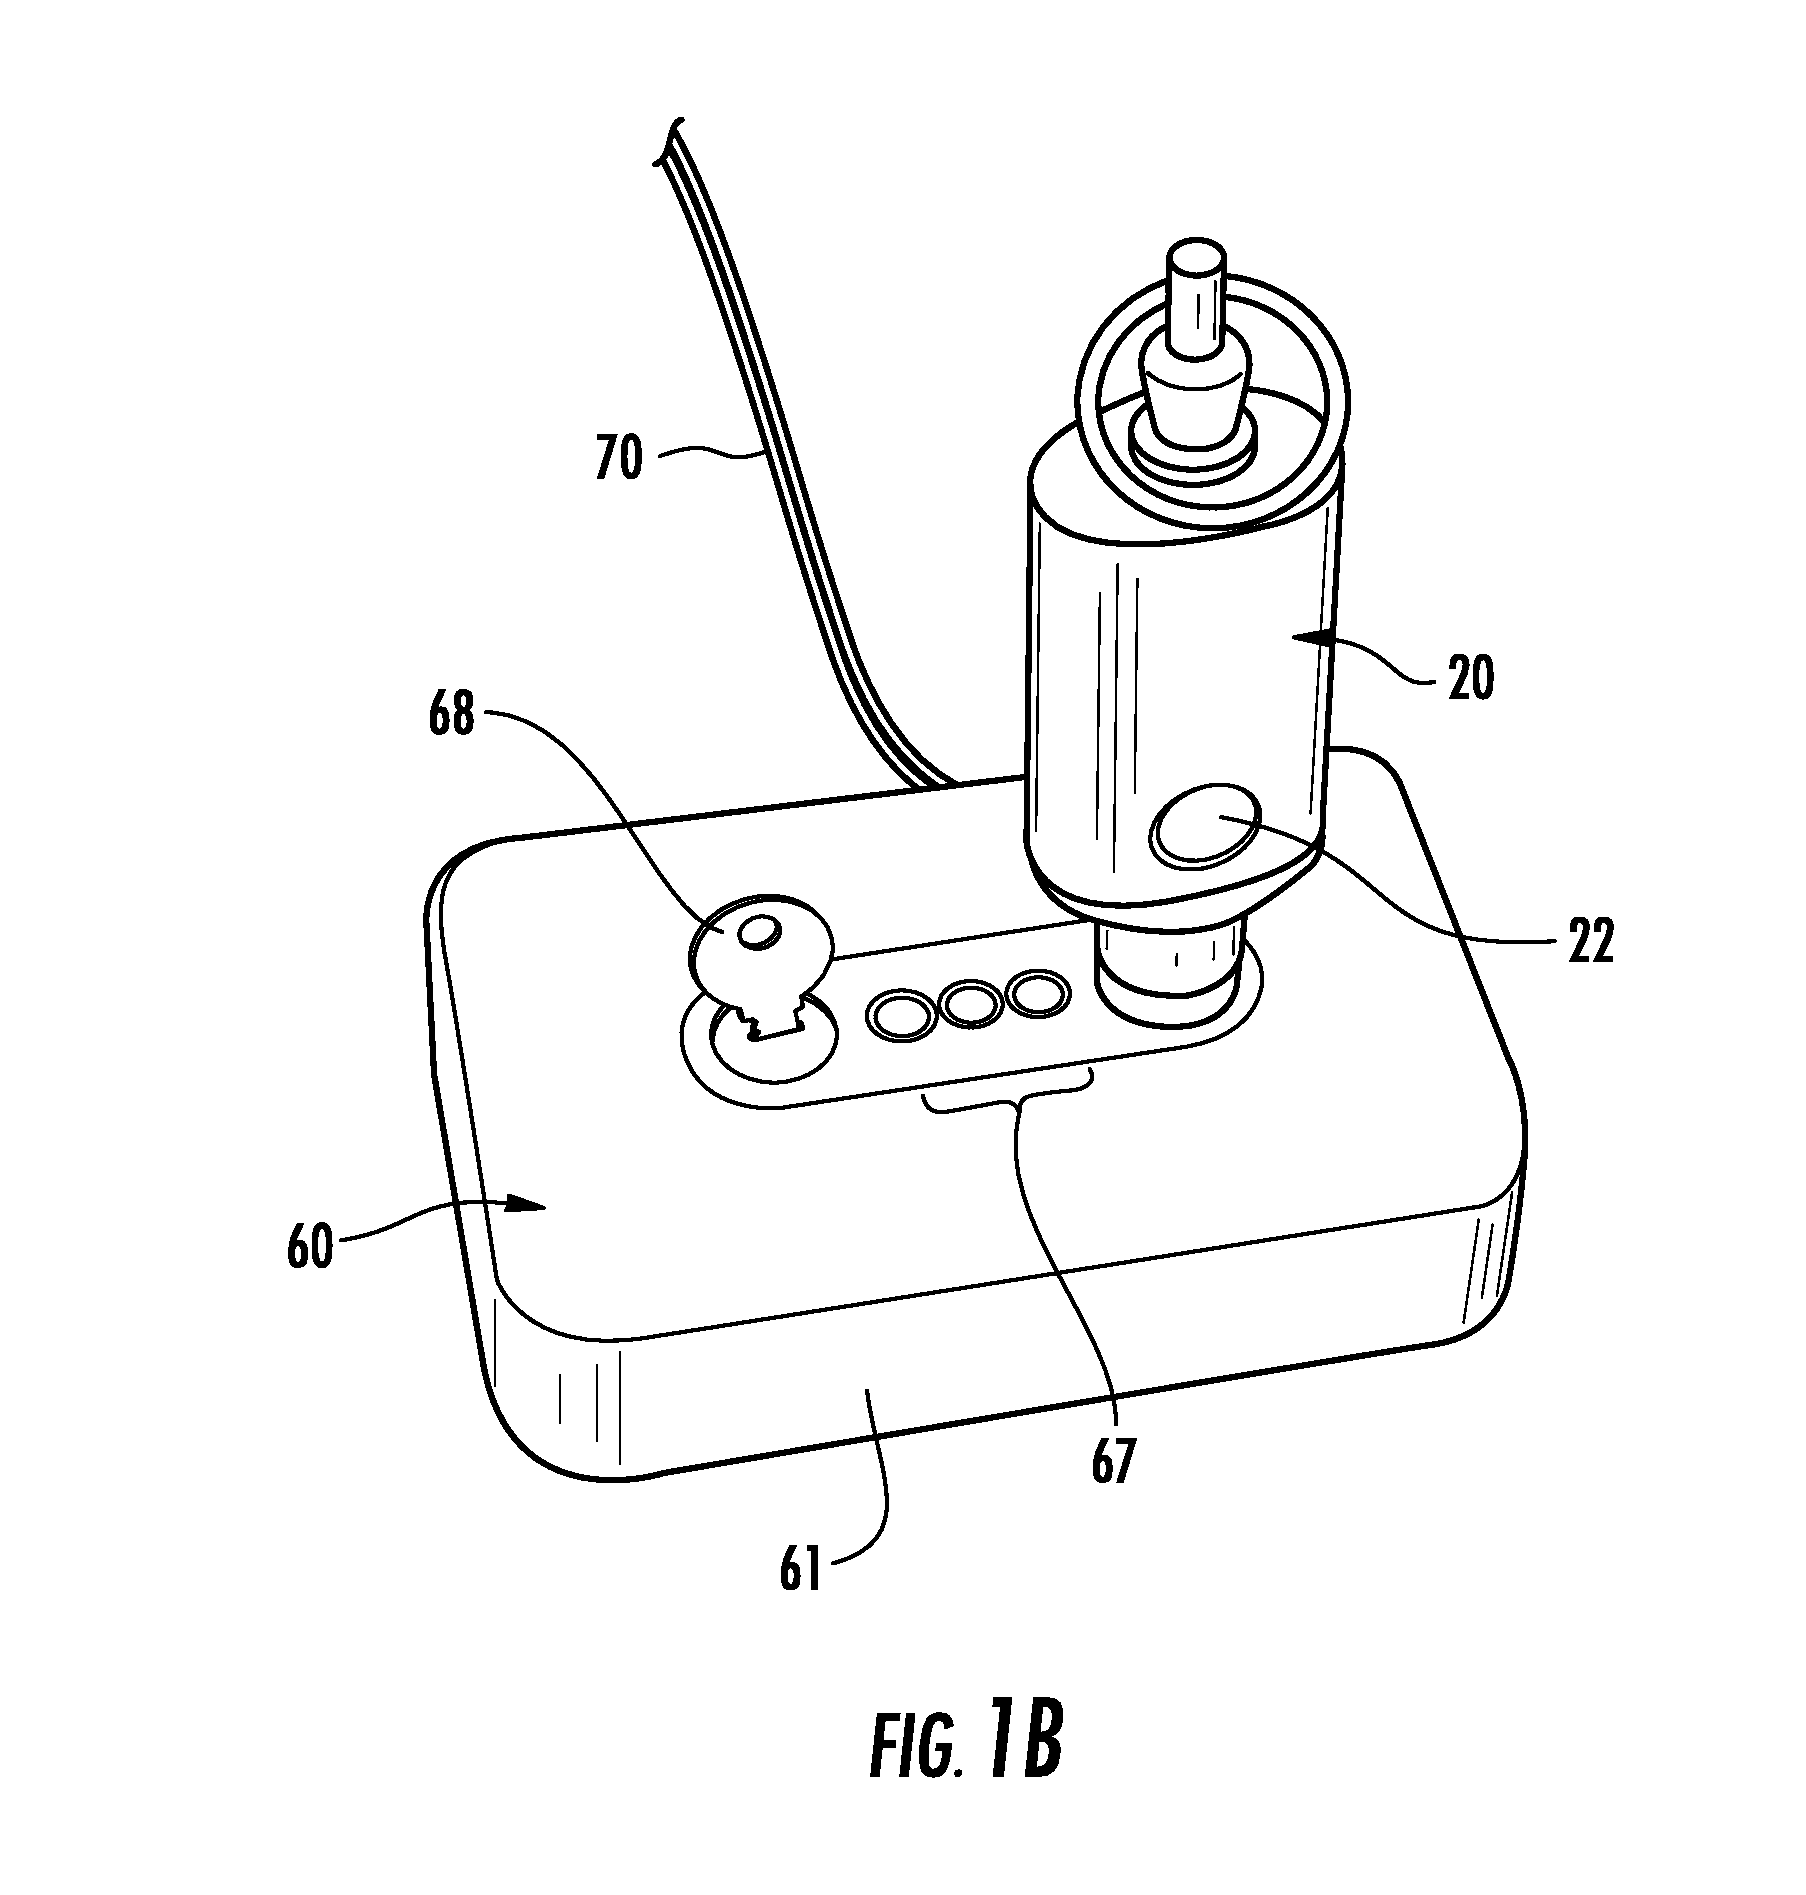 Electronic key for merchandise security device